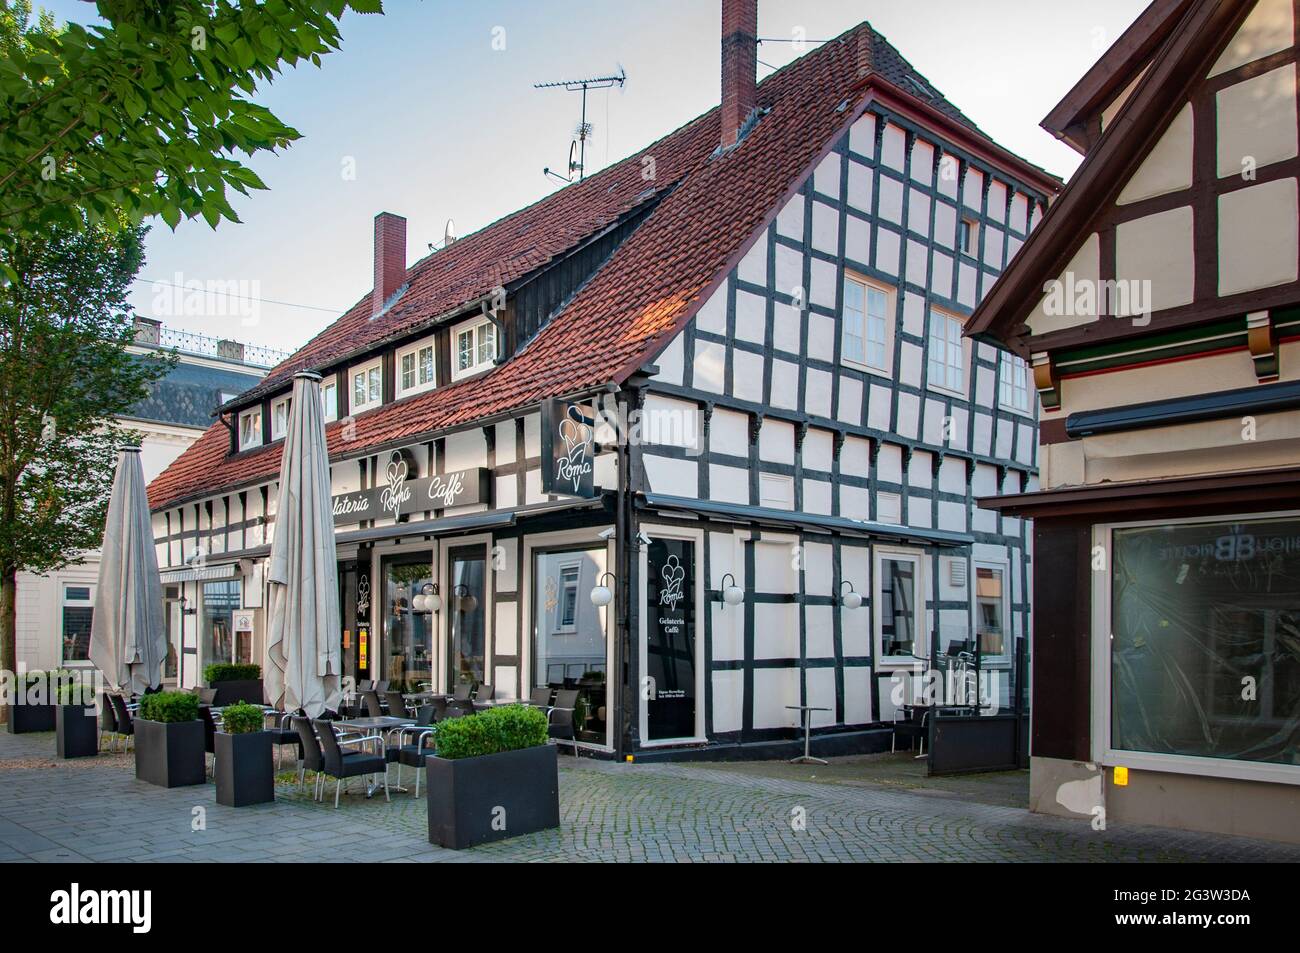 BUNDE, GERMANY. JUNE 12, 2021. Roma cafe, gelateria. Beautiful view of small german town with typical architecture. Fachwerk style, Prussian wall. Stock Photo